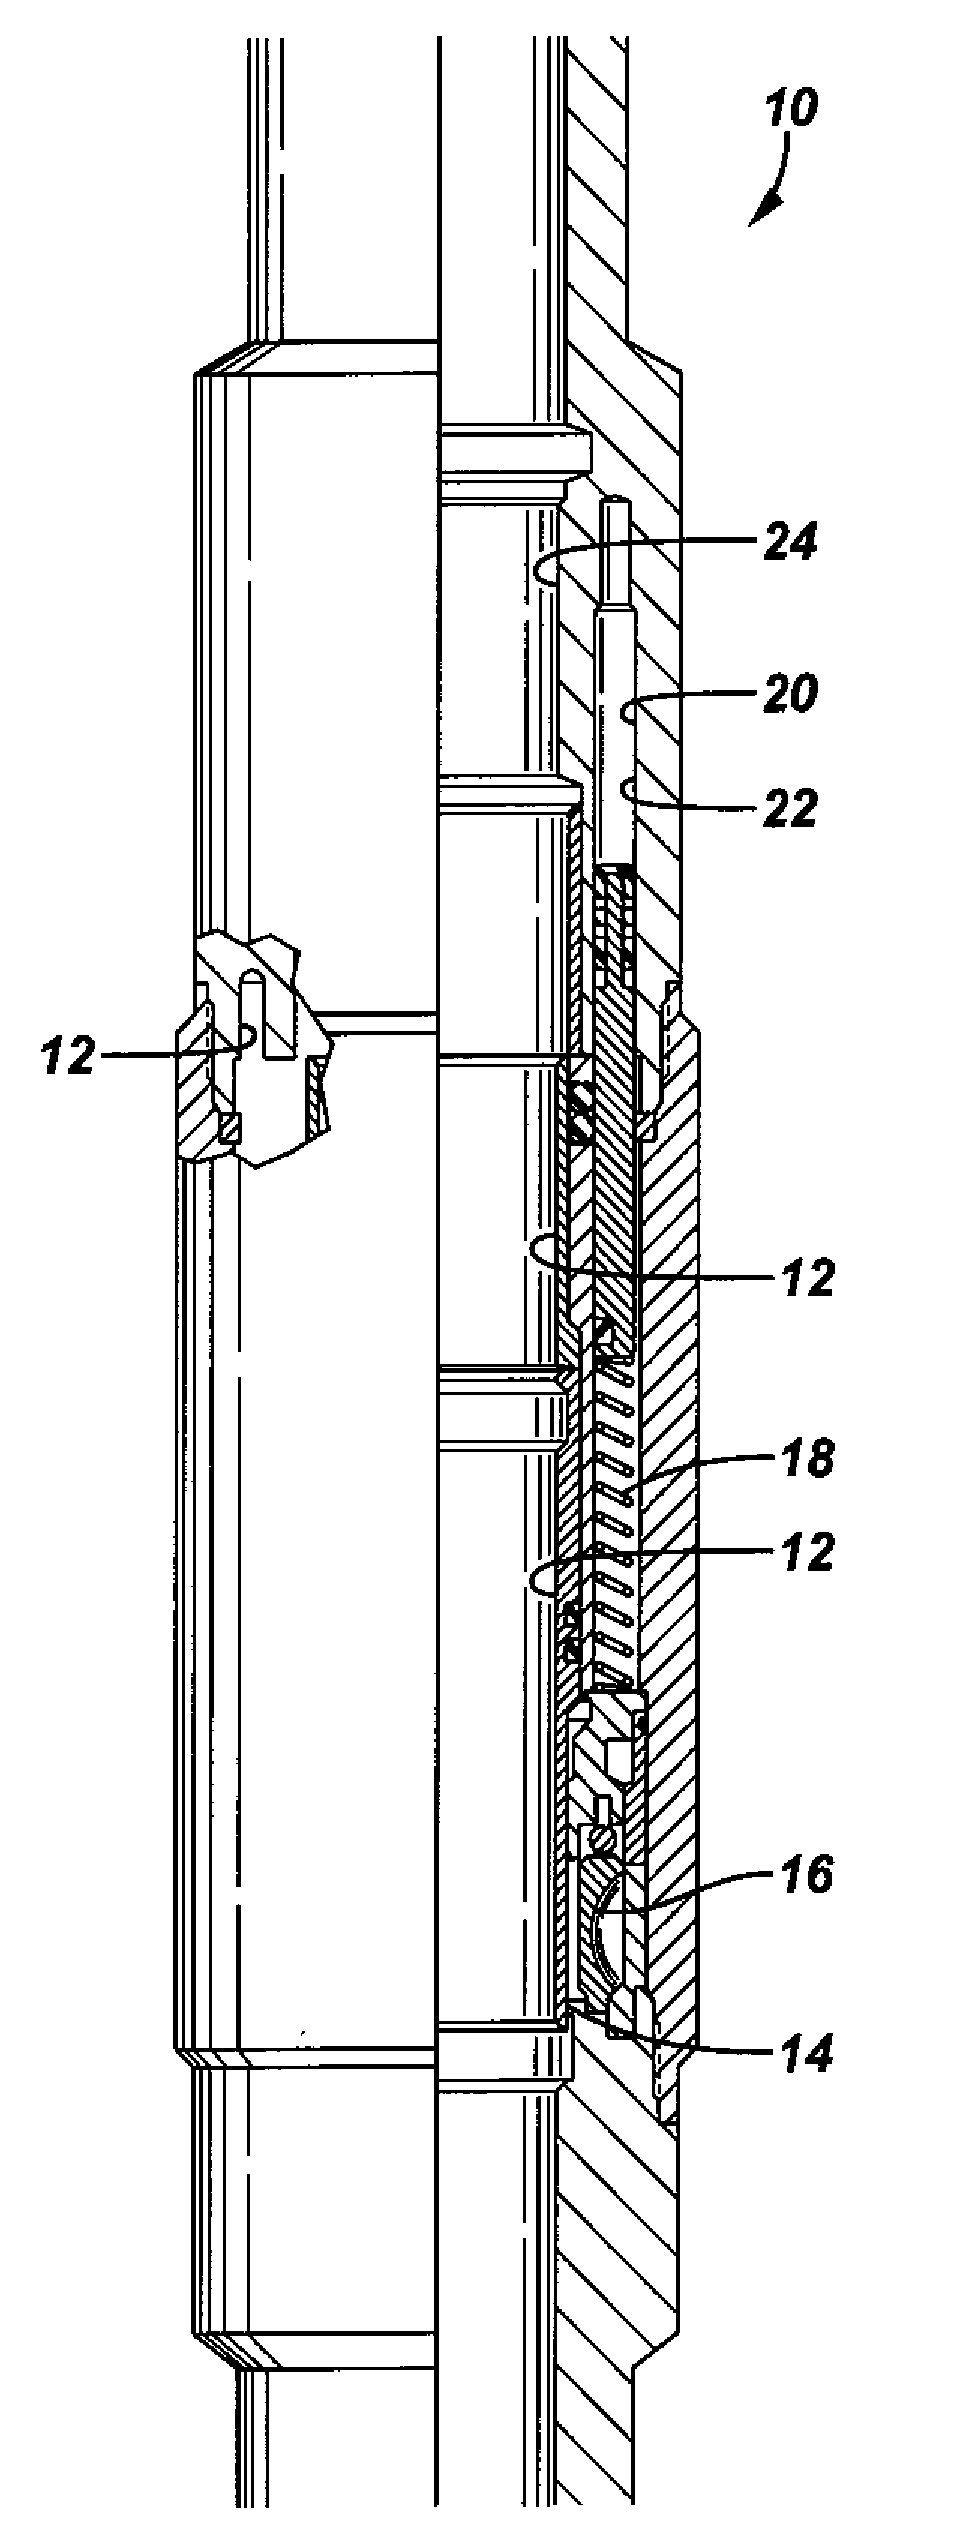 Downhole oilfield apparatus comprising a diamond-like carbon coating and methods of use